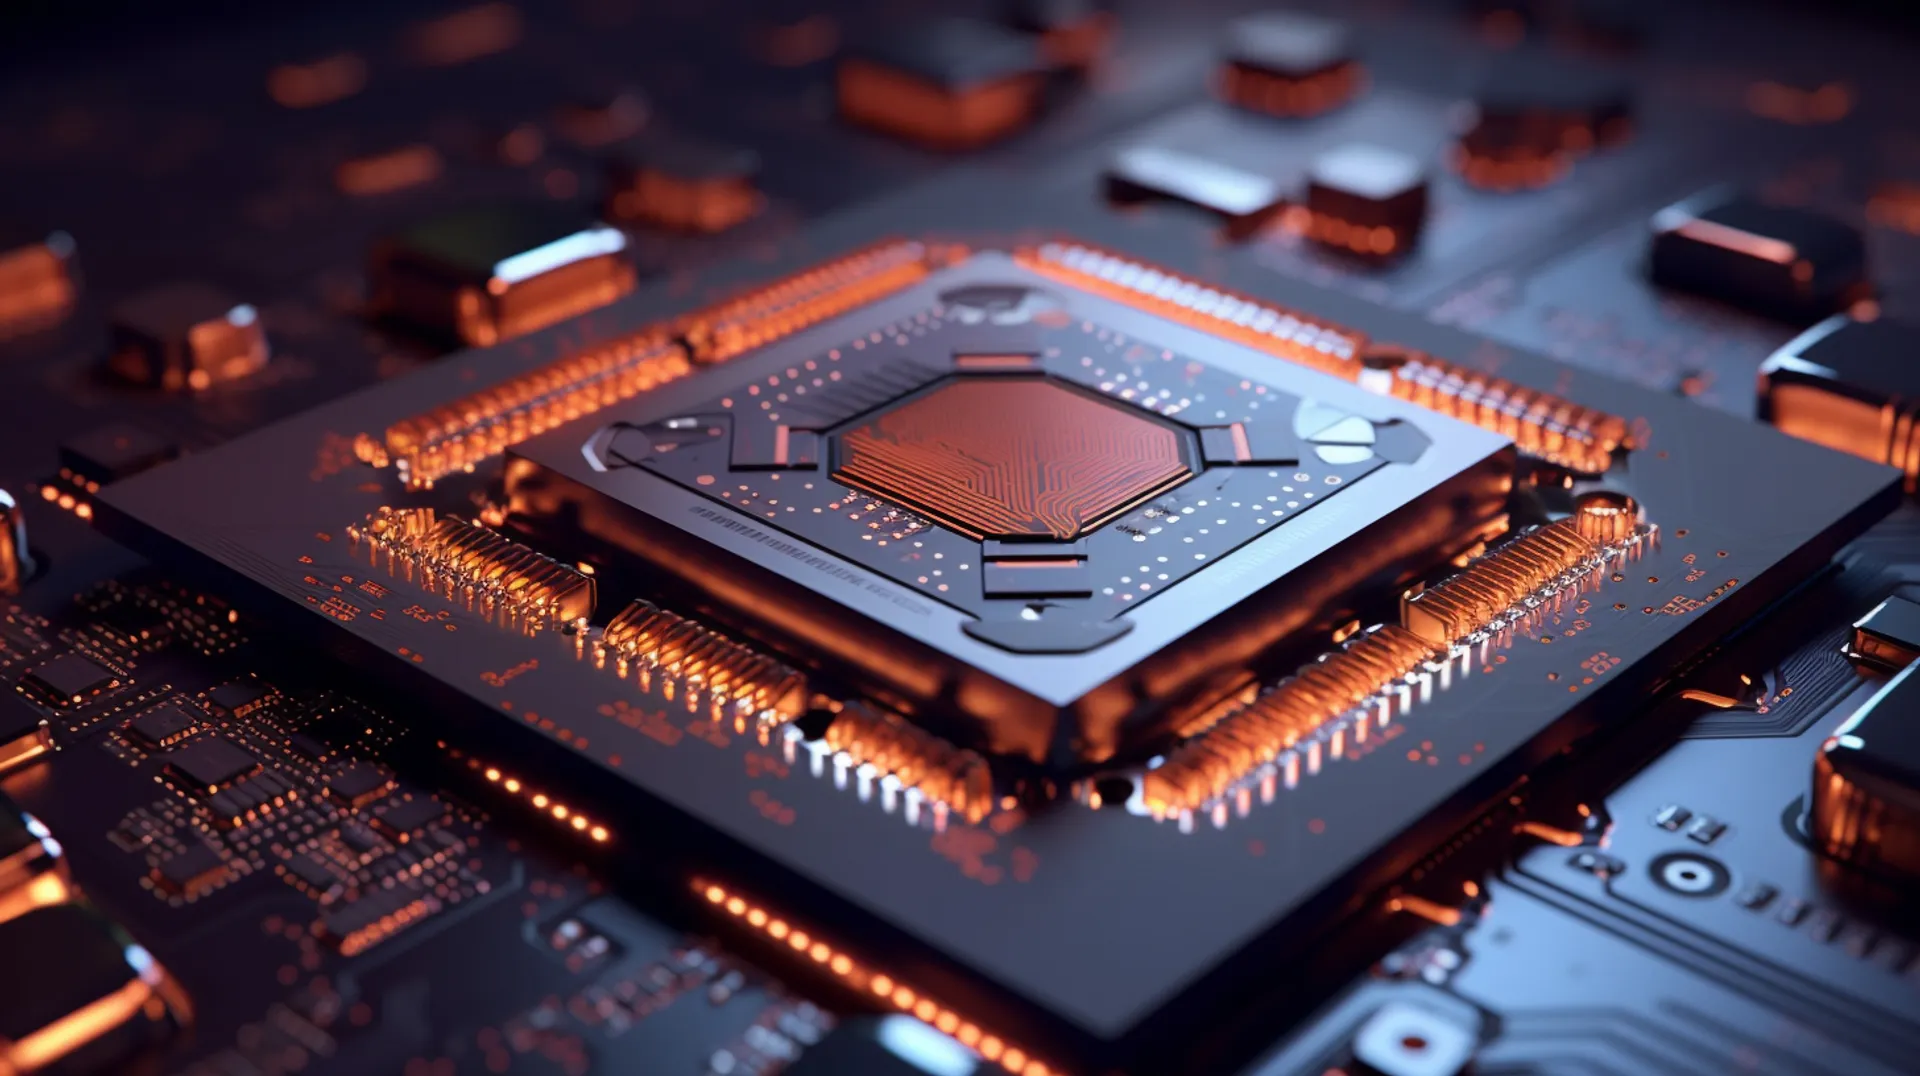 🚀 The AI processor industry is booming and competition is heating up!

👥 Microsoft  and AMD  have partnered to challenge Nvidia's market dominance in the AI processor industry.

🤝 Microsoft is providing engineering resources to aid AMD's expansion into AI, while AMD is helping Microsoft develop its in-house AI chips, codenamed Athena.

💻 AMD plans to launch its Instinct MI300 data center chip, which is expected to give the company more prominence in the AI industry.

🔮 The future of the AI processor industry is expected to lead to innovative products and will drive development and growth in the industry.

🌟 The collaboration between Microsoft and AMD underscores the significance of working together in the industry to create quicker and more effective processors that will revolutionize AI applications across various fields.

Full article 👉 https://webthat.io/microsoft-and-amds-role-in-the-future-of-the-ai-processor-industry/